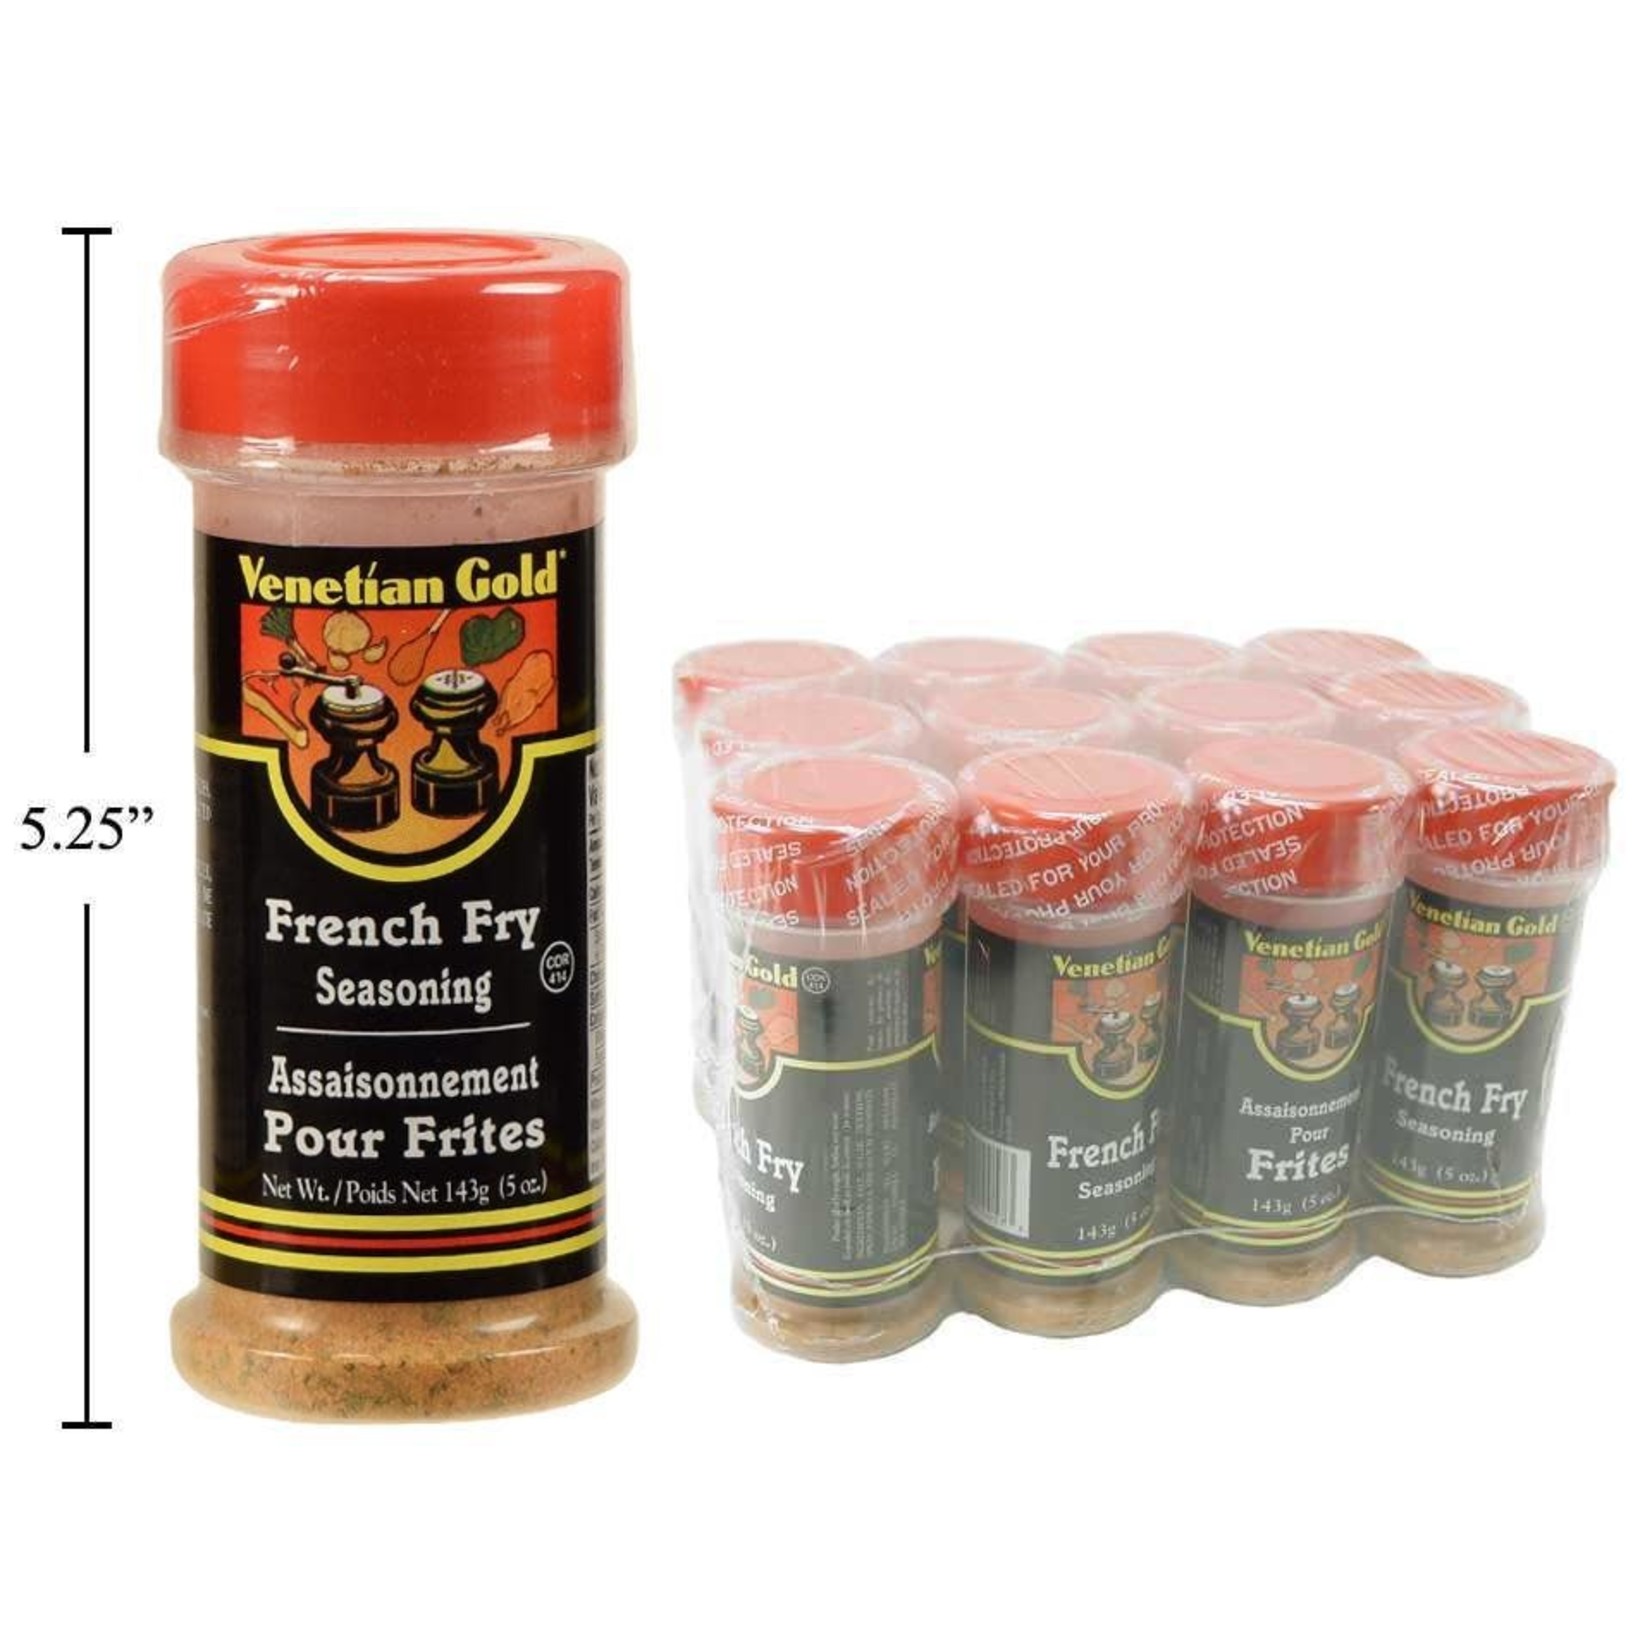 VENETIAN GOLD SPICES - FRENCH FRY SEASONING 143 g.